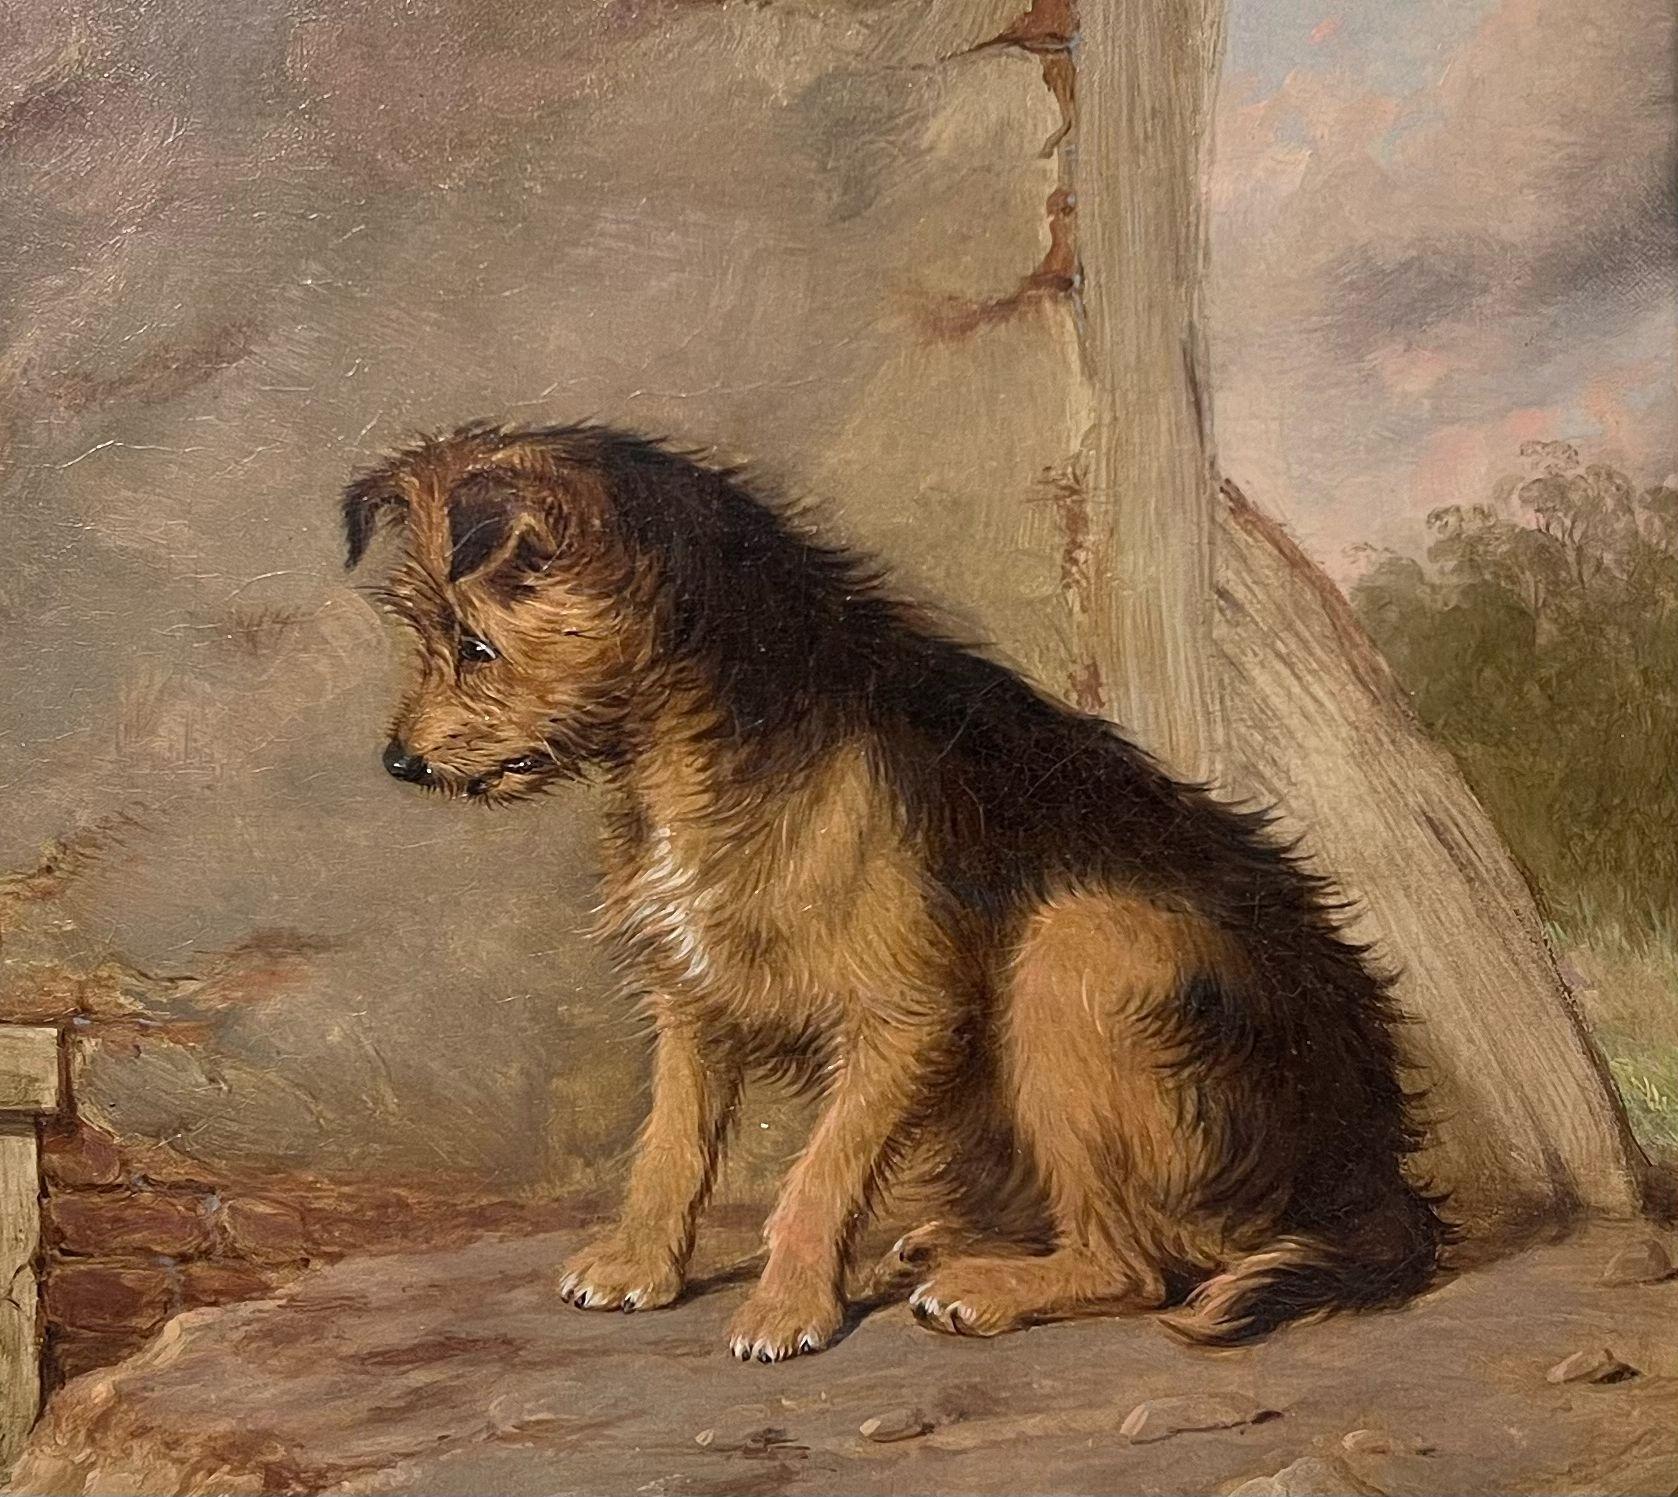 The Alert Terrier
by Martin Theodore Ward (British 1799-1874)
oil on canvas, framed
framed: 15.5 x 17.5 inches
canvas : 10 x 12 inches
provenance: private collection, Berkshire, England
condition: very good and sound condition; please note we do not